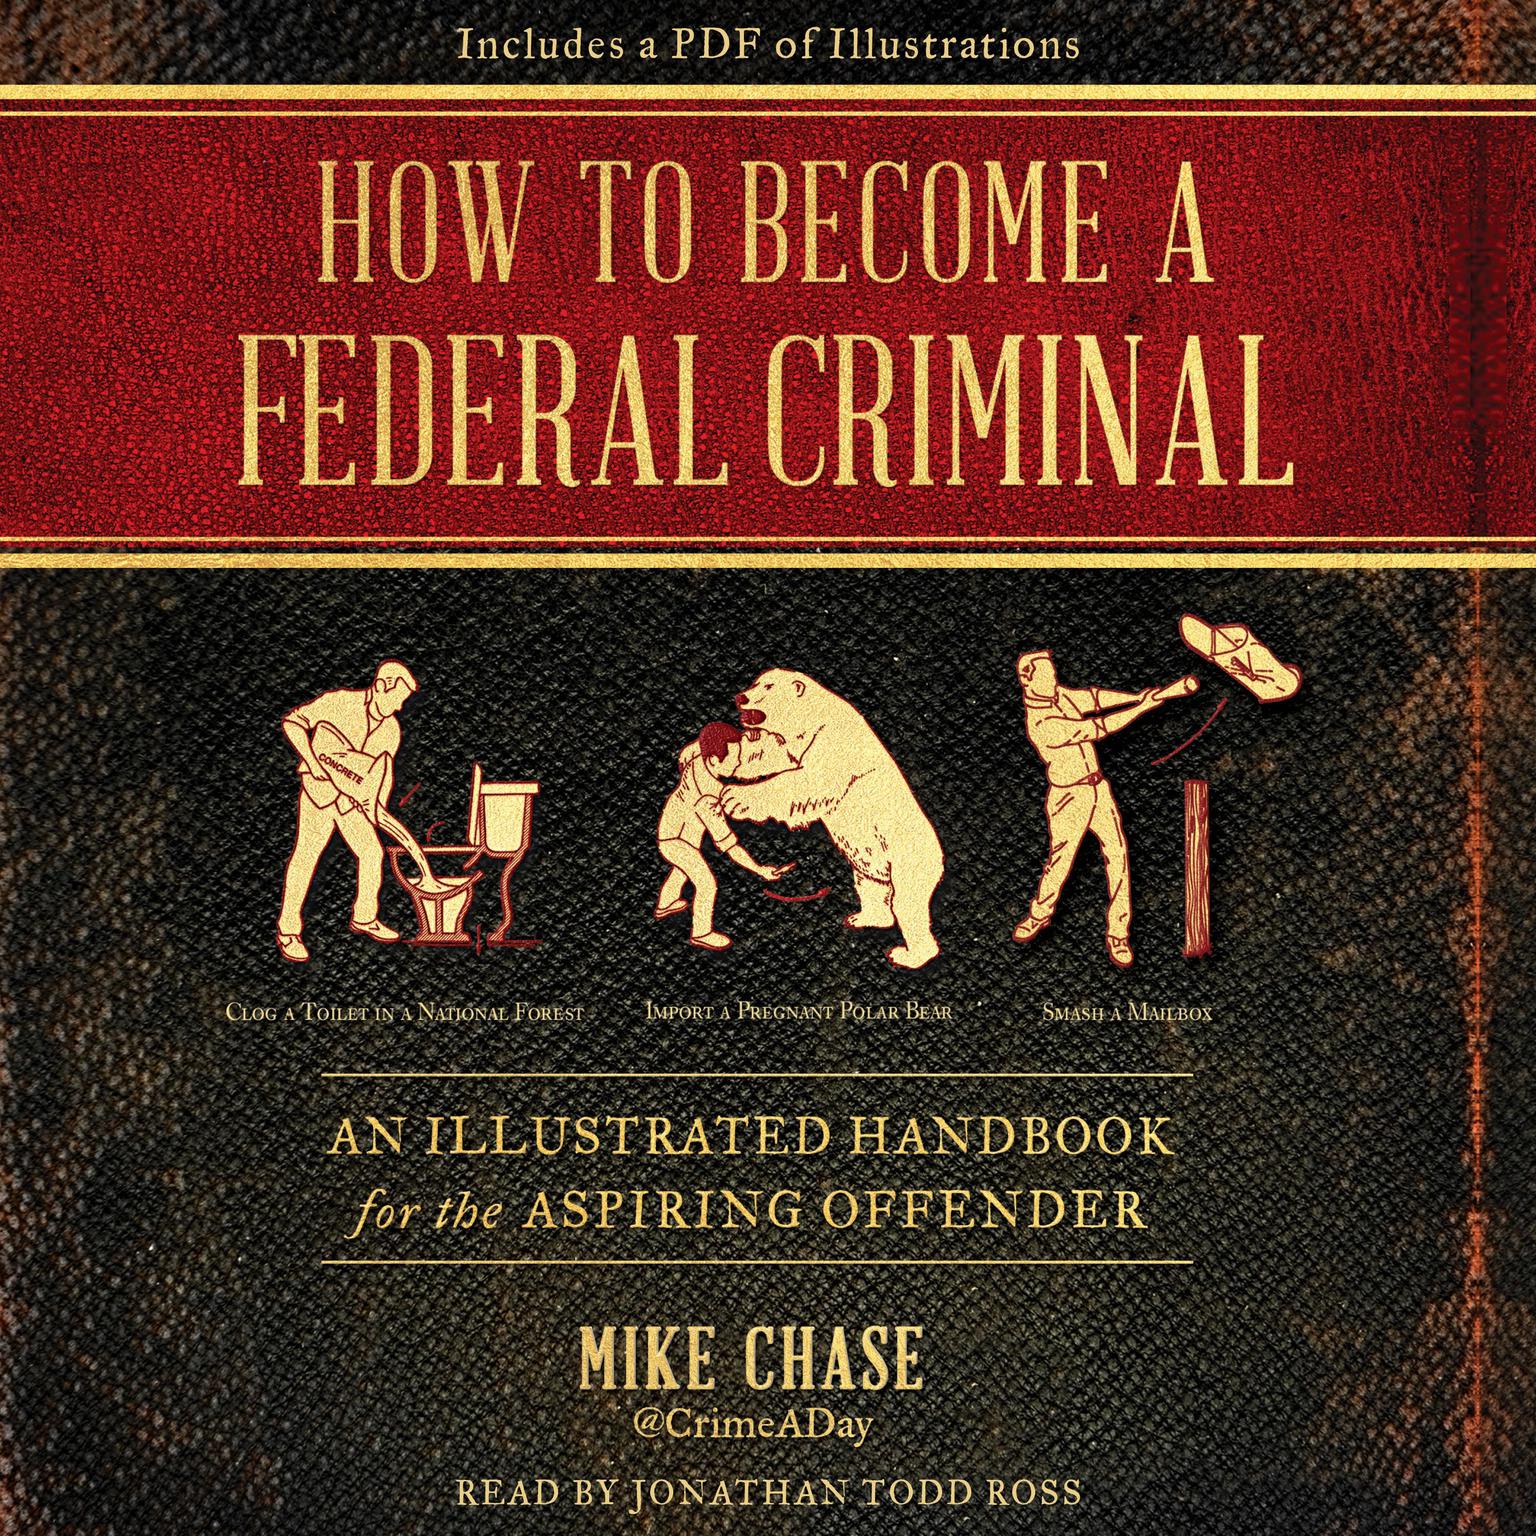 How to Become a Federal Criminal: An Illustrated Handbook for the Aspiring Offender Audiobook, by Mike Chase